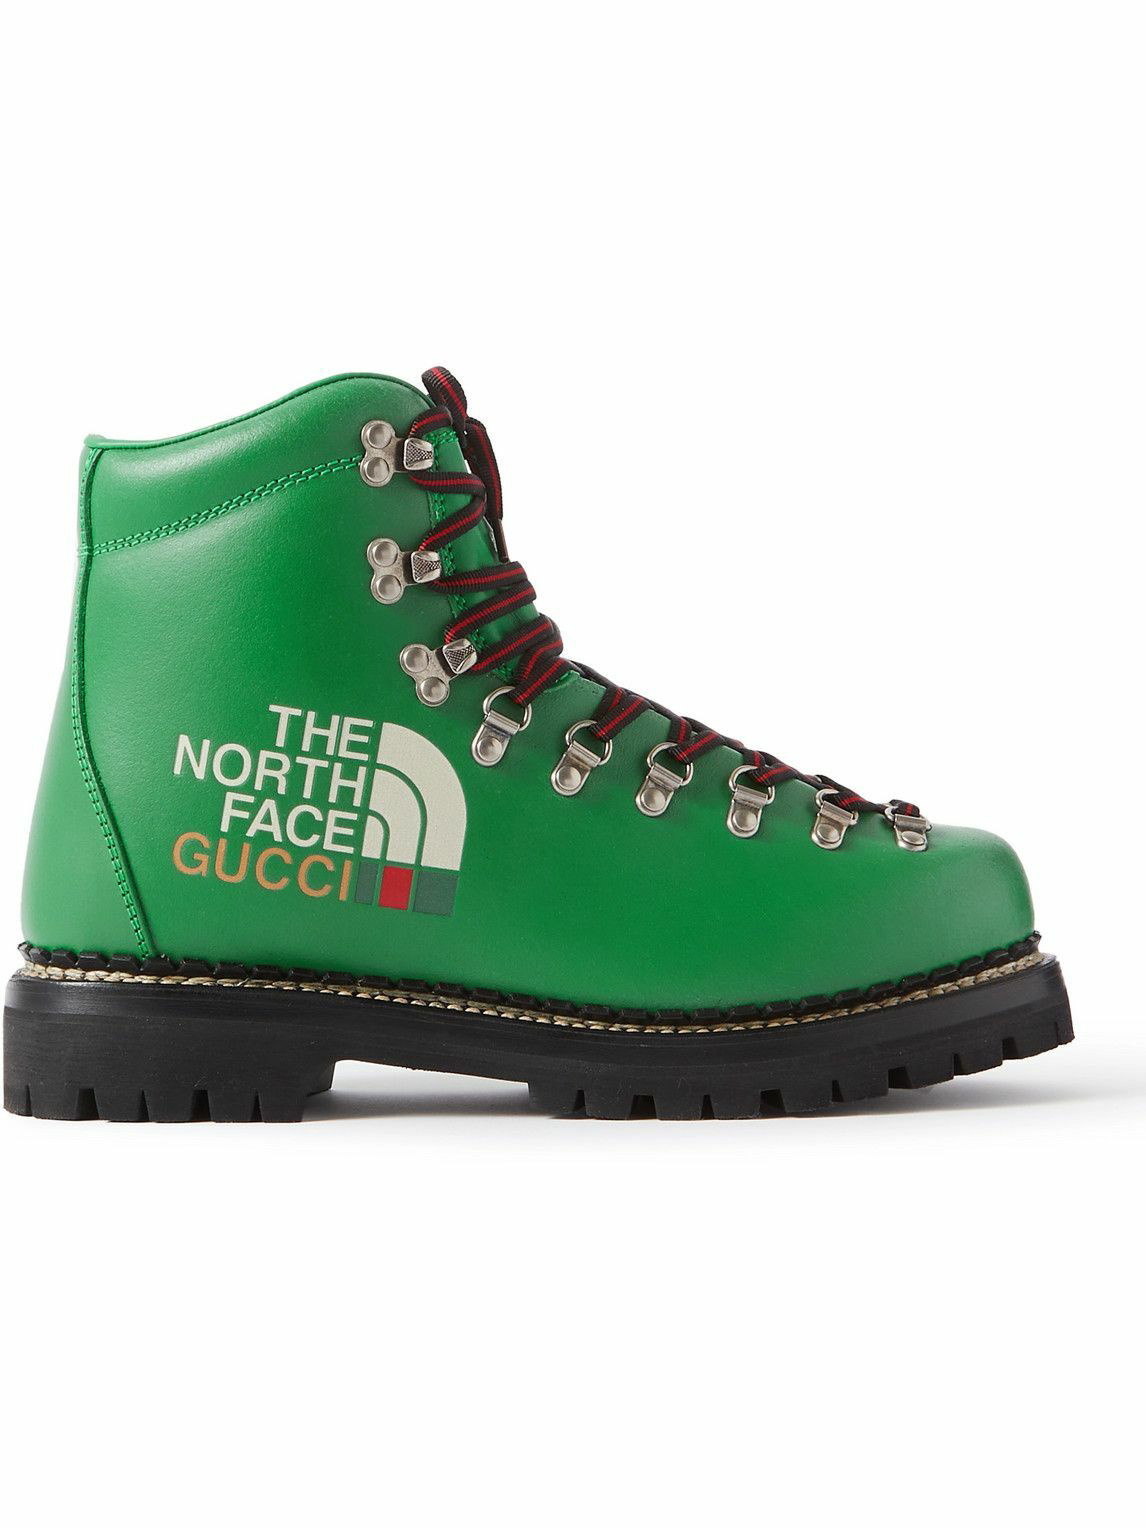 Gucci X The North Face Green Leather Lace-up Boots Size 38